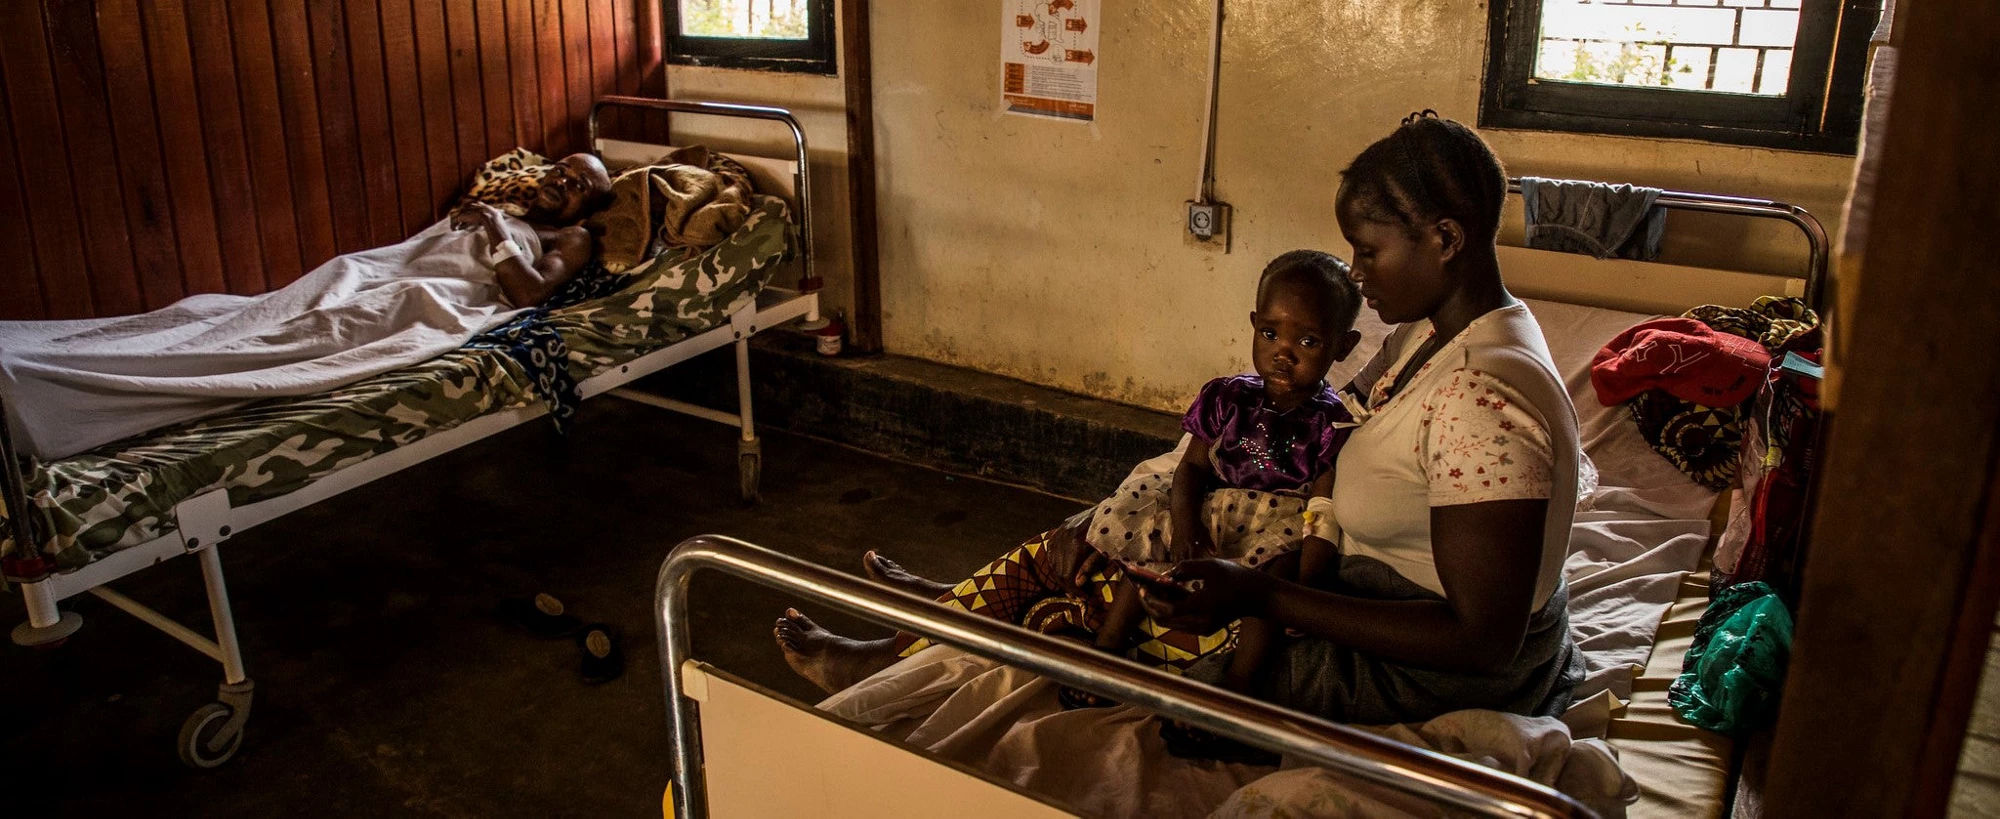 A mother and her daughter at the general hospital of Beni, Democratic Republic of Congo. Photo: World Bank / Vincent Tremeau